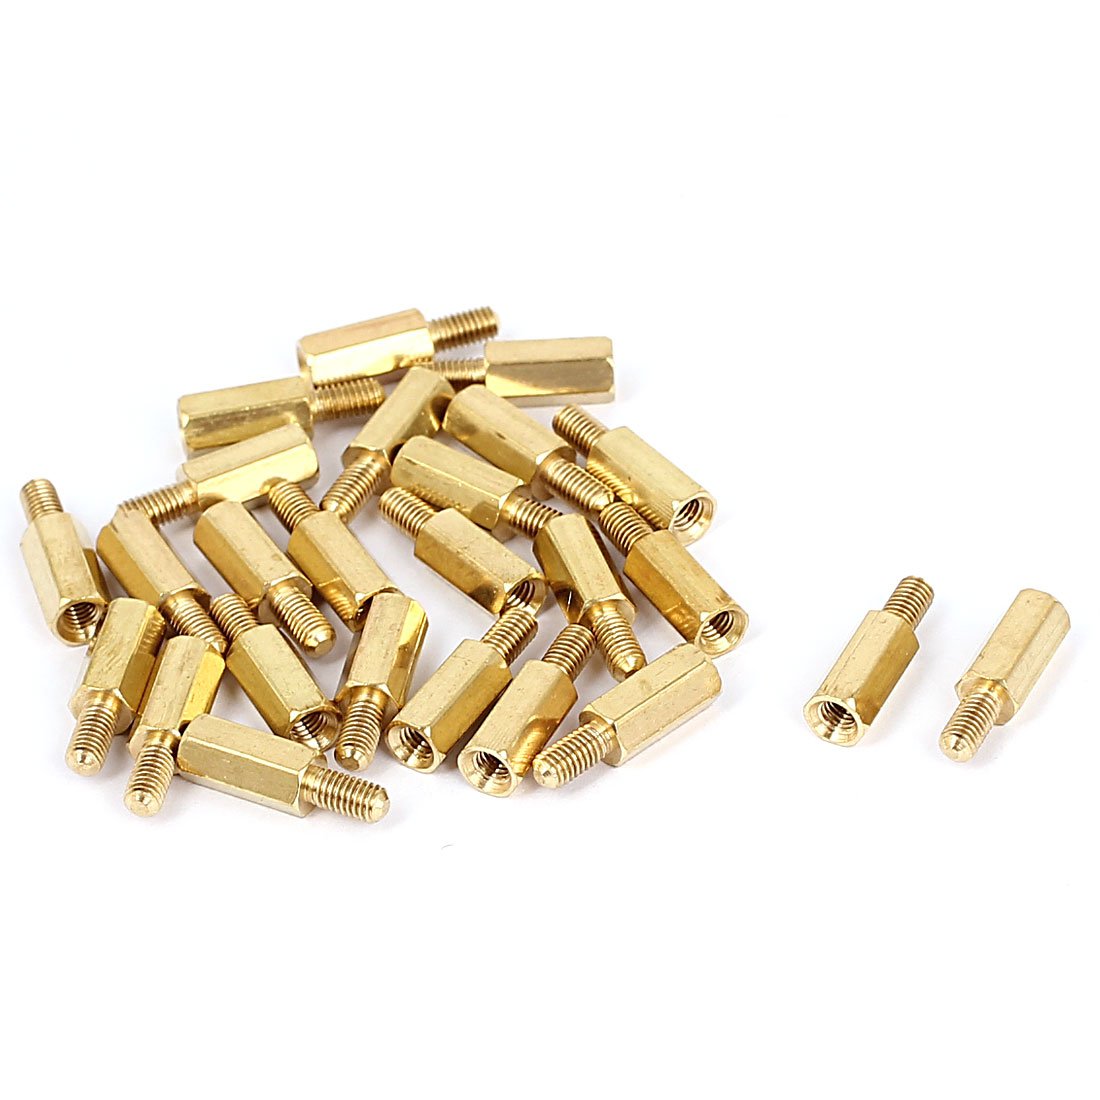 Buy M3 X 10mm Male-Female Brass Hex Threaded Pillar Standoff Spacer- 24 Pcs.  Online at